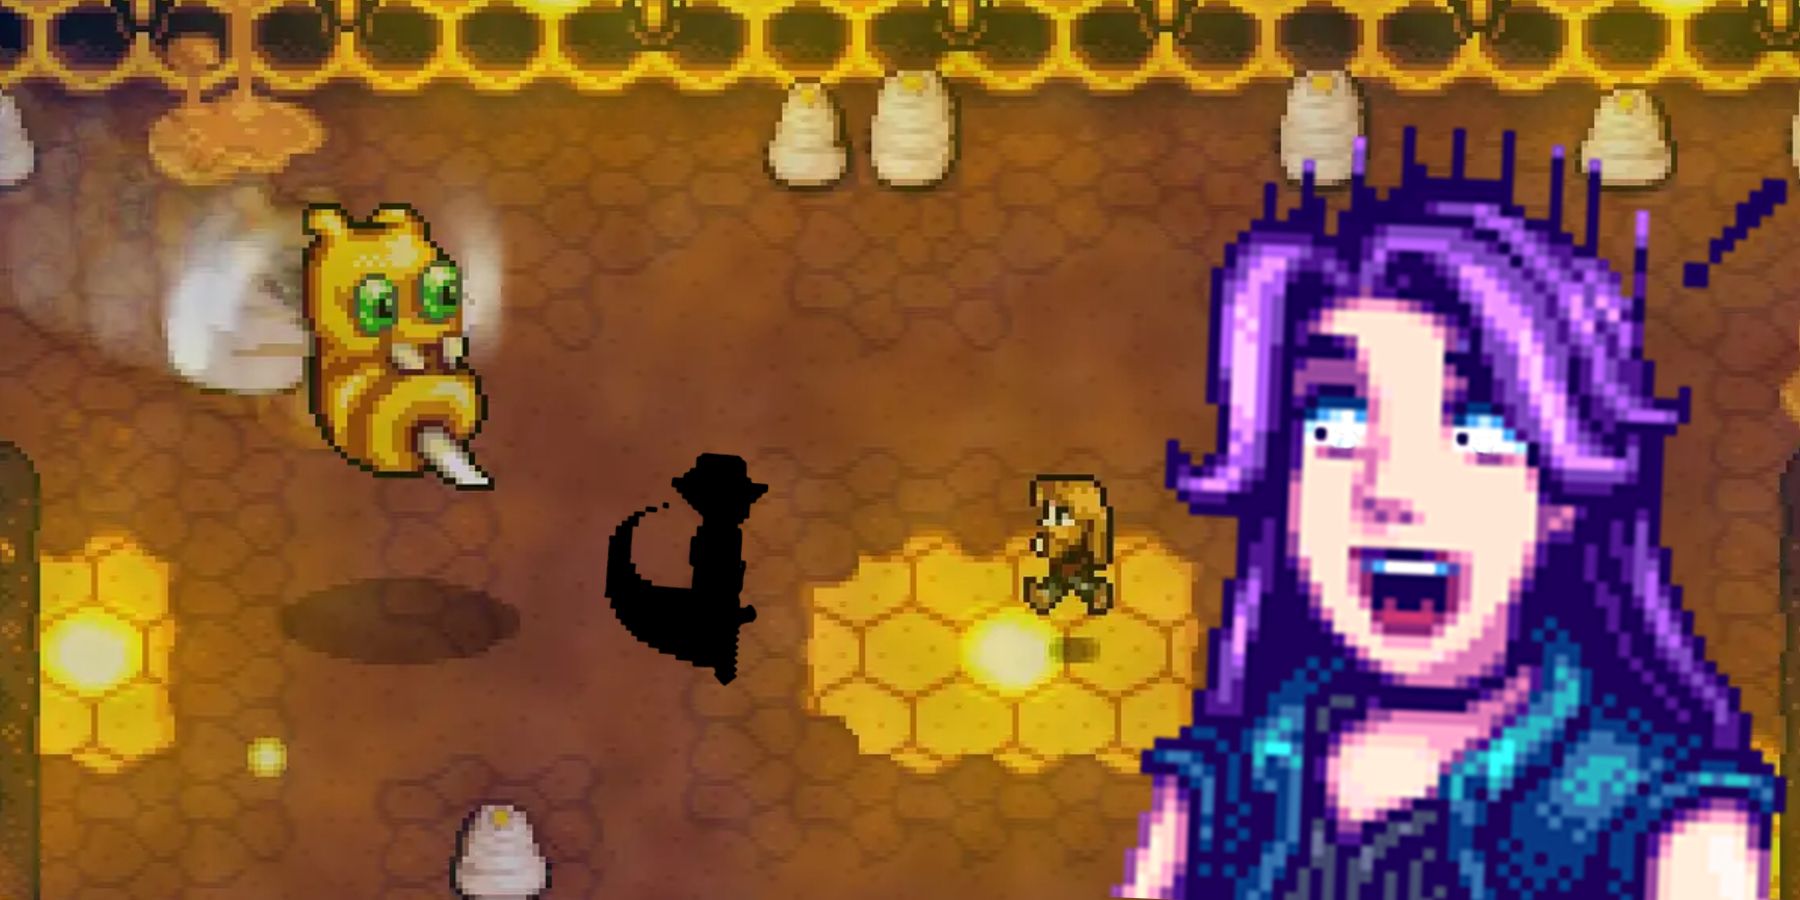 Abigail looks shocked as the player from Haunted Chocolatier and a shadowy figure battle against a giat bee.